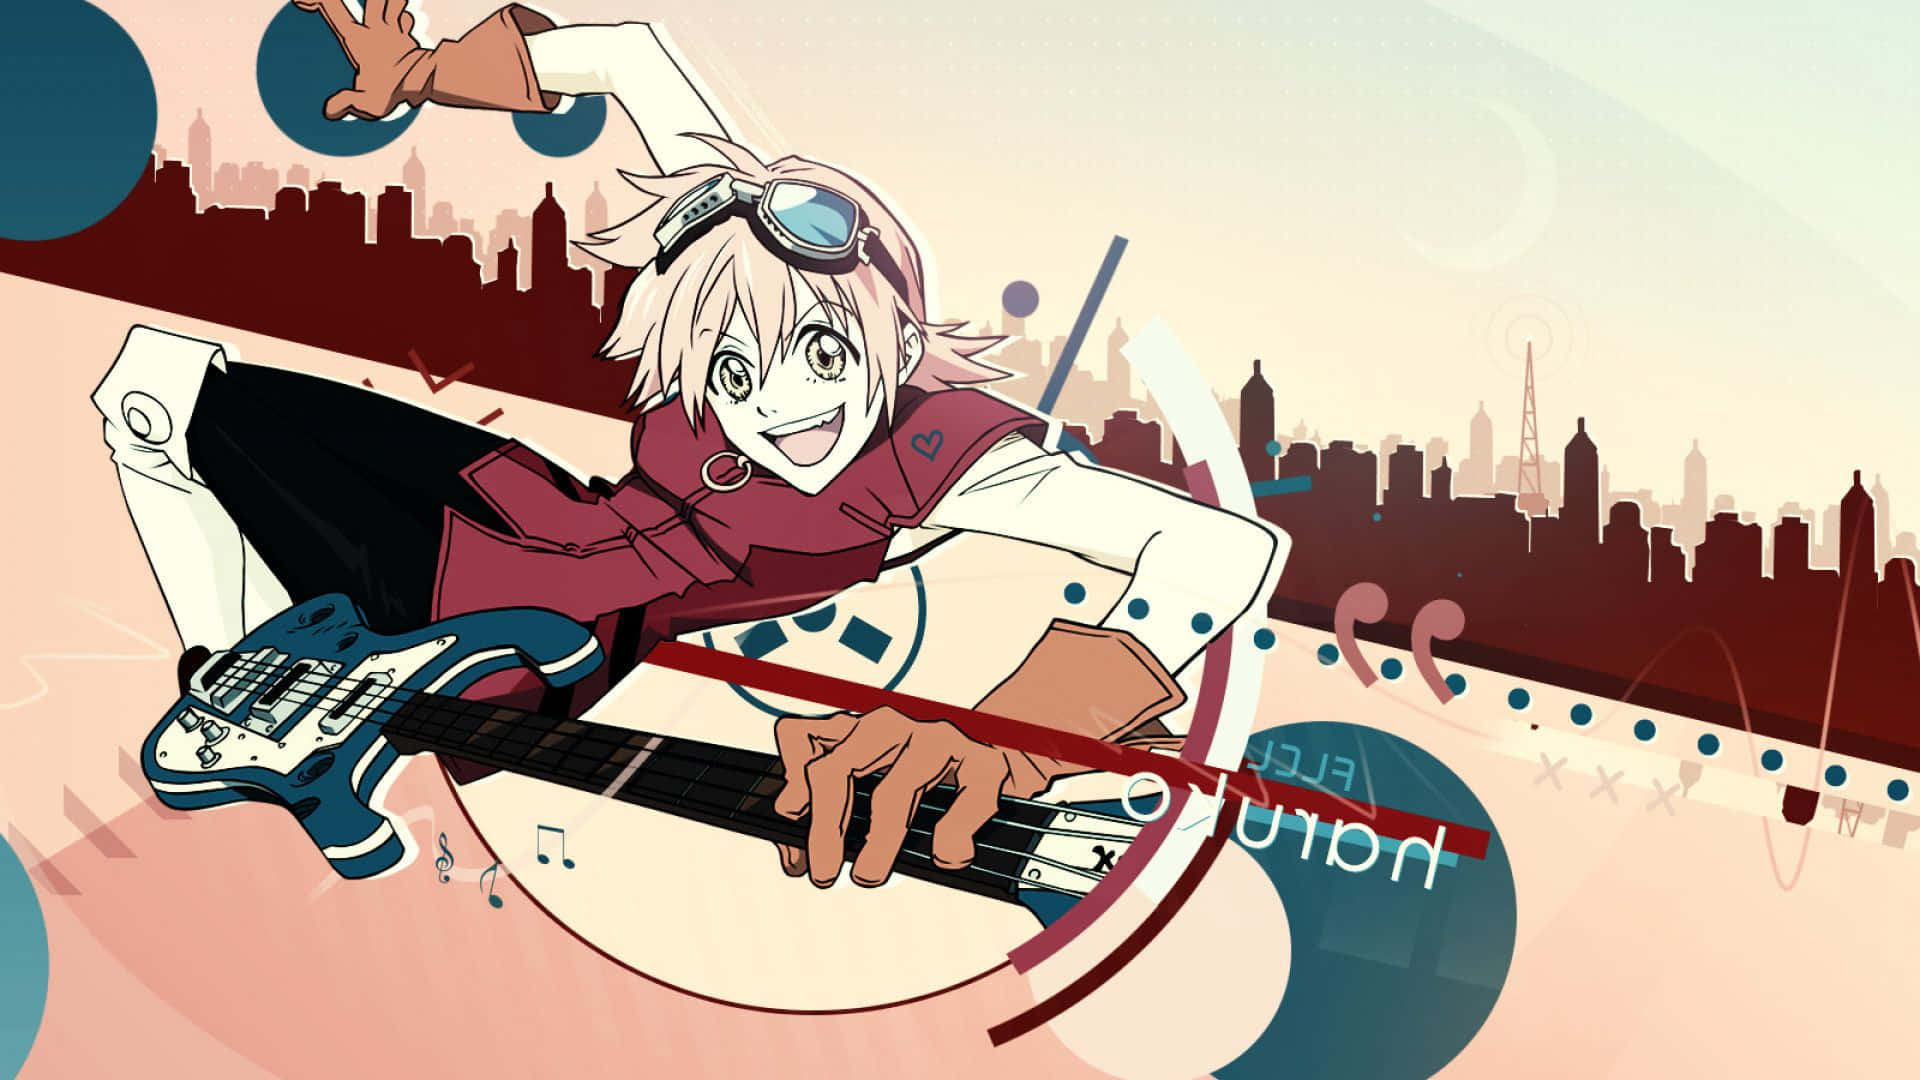 "Haruko Haruhara from FLCL entering the Medical Mechanica building"